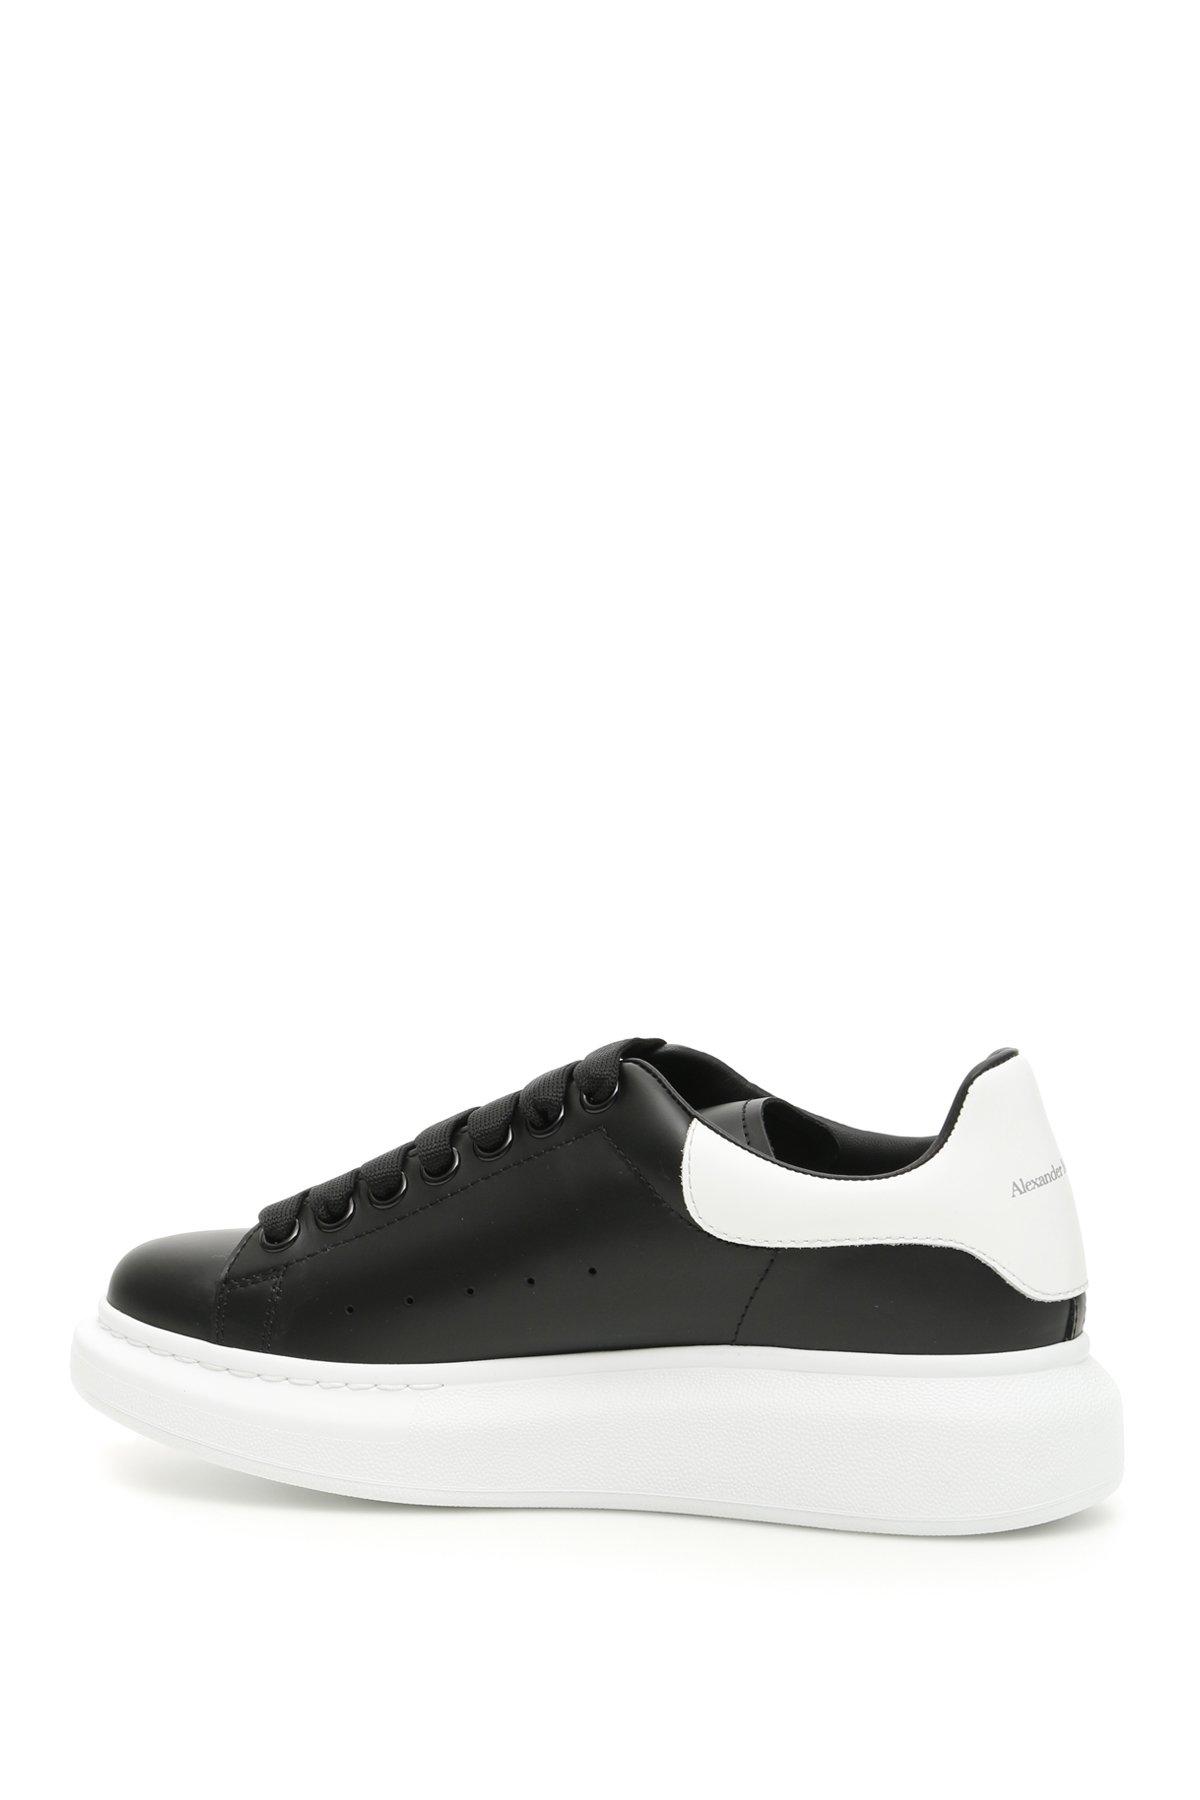 Alexander McQueen Leather Oversized Sole Sneakers Black/white for Men -  Save 34% - Lyst